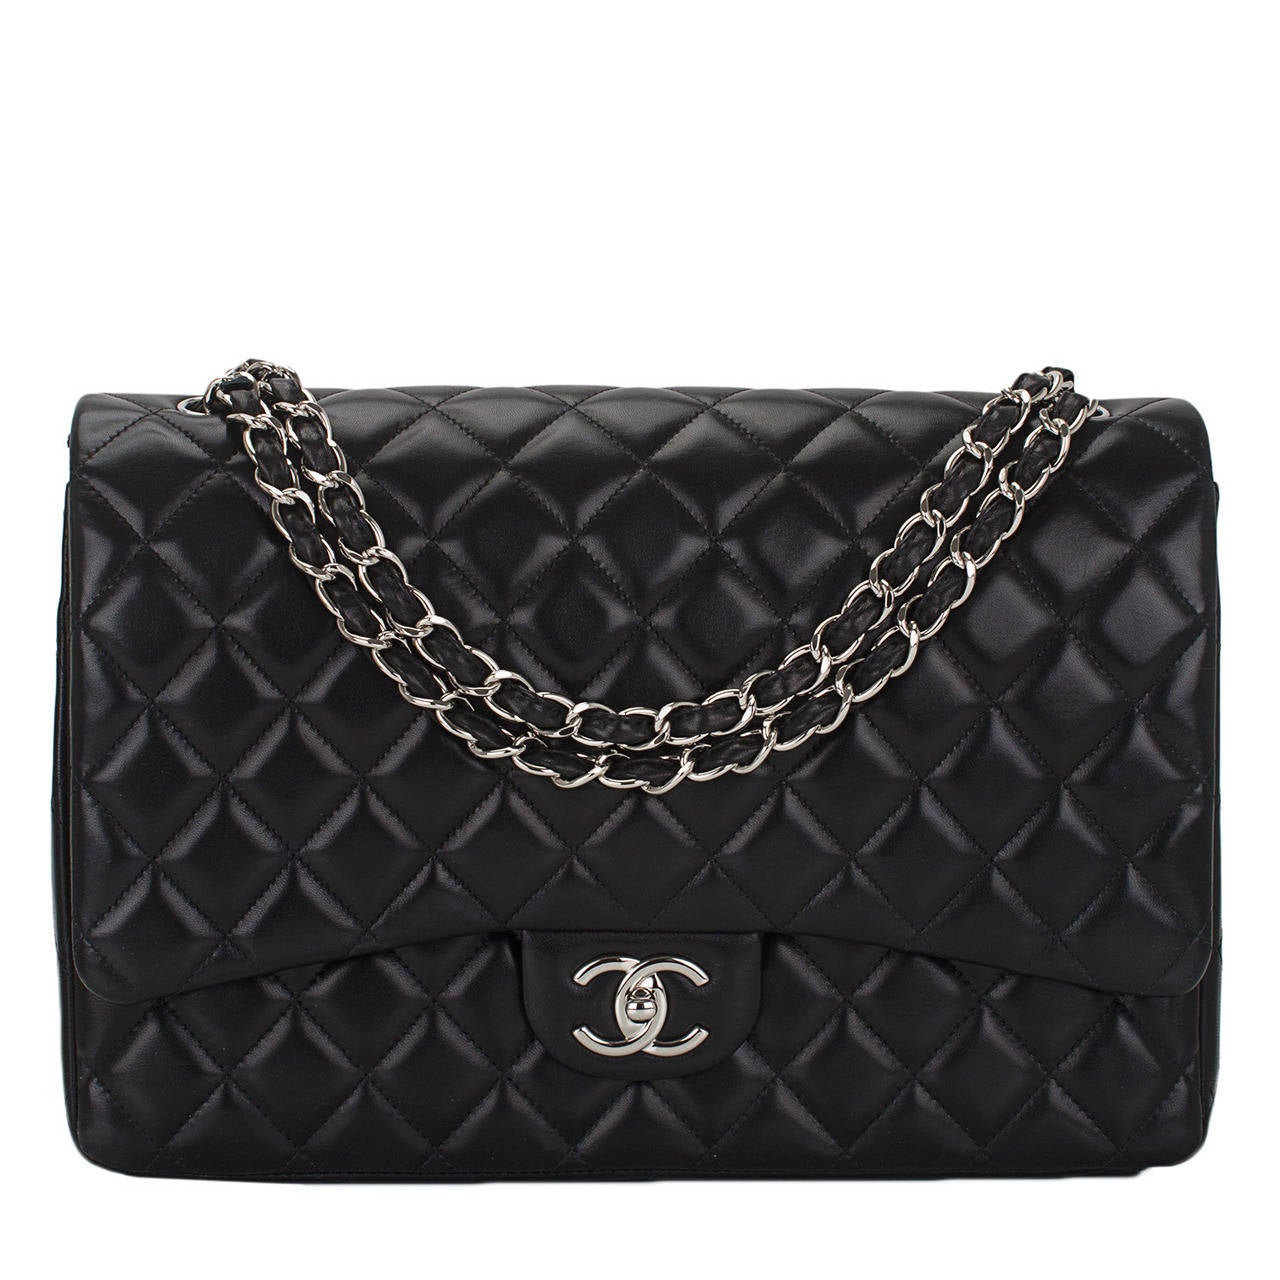 Chanel Black Quilted Lambskin Maxi Classic Double Flap Bag